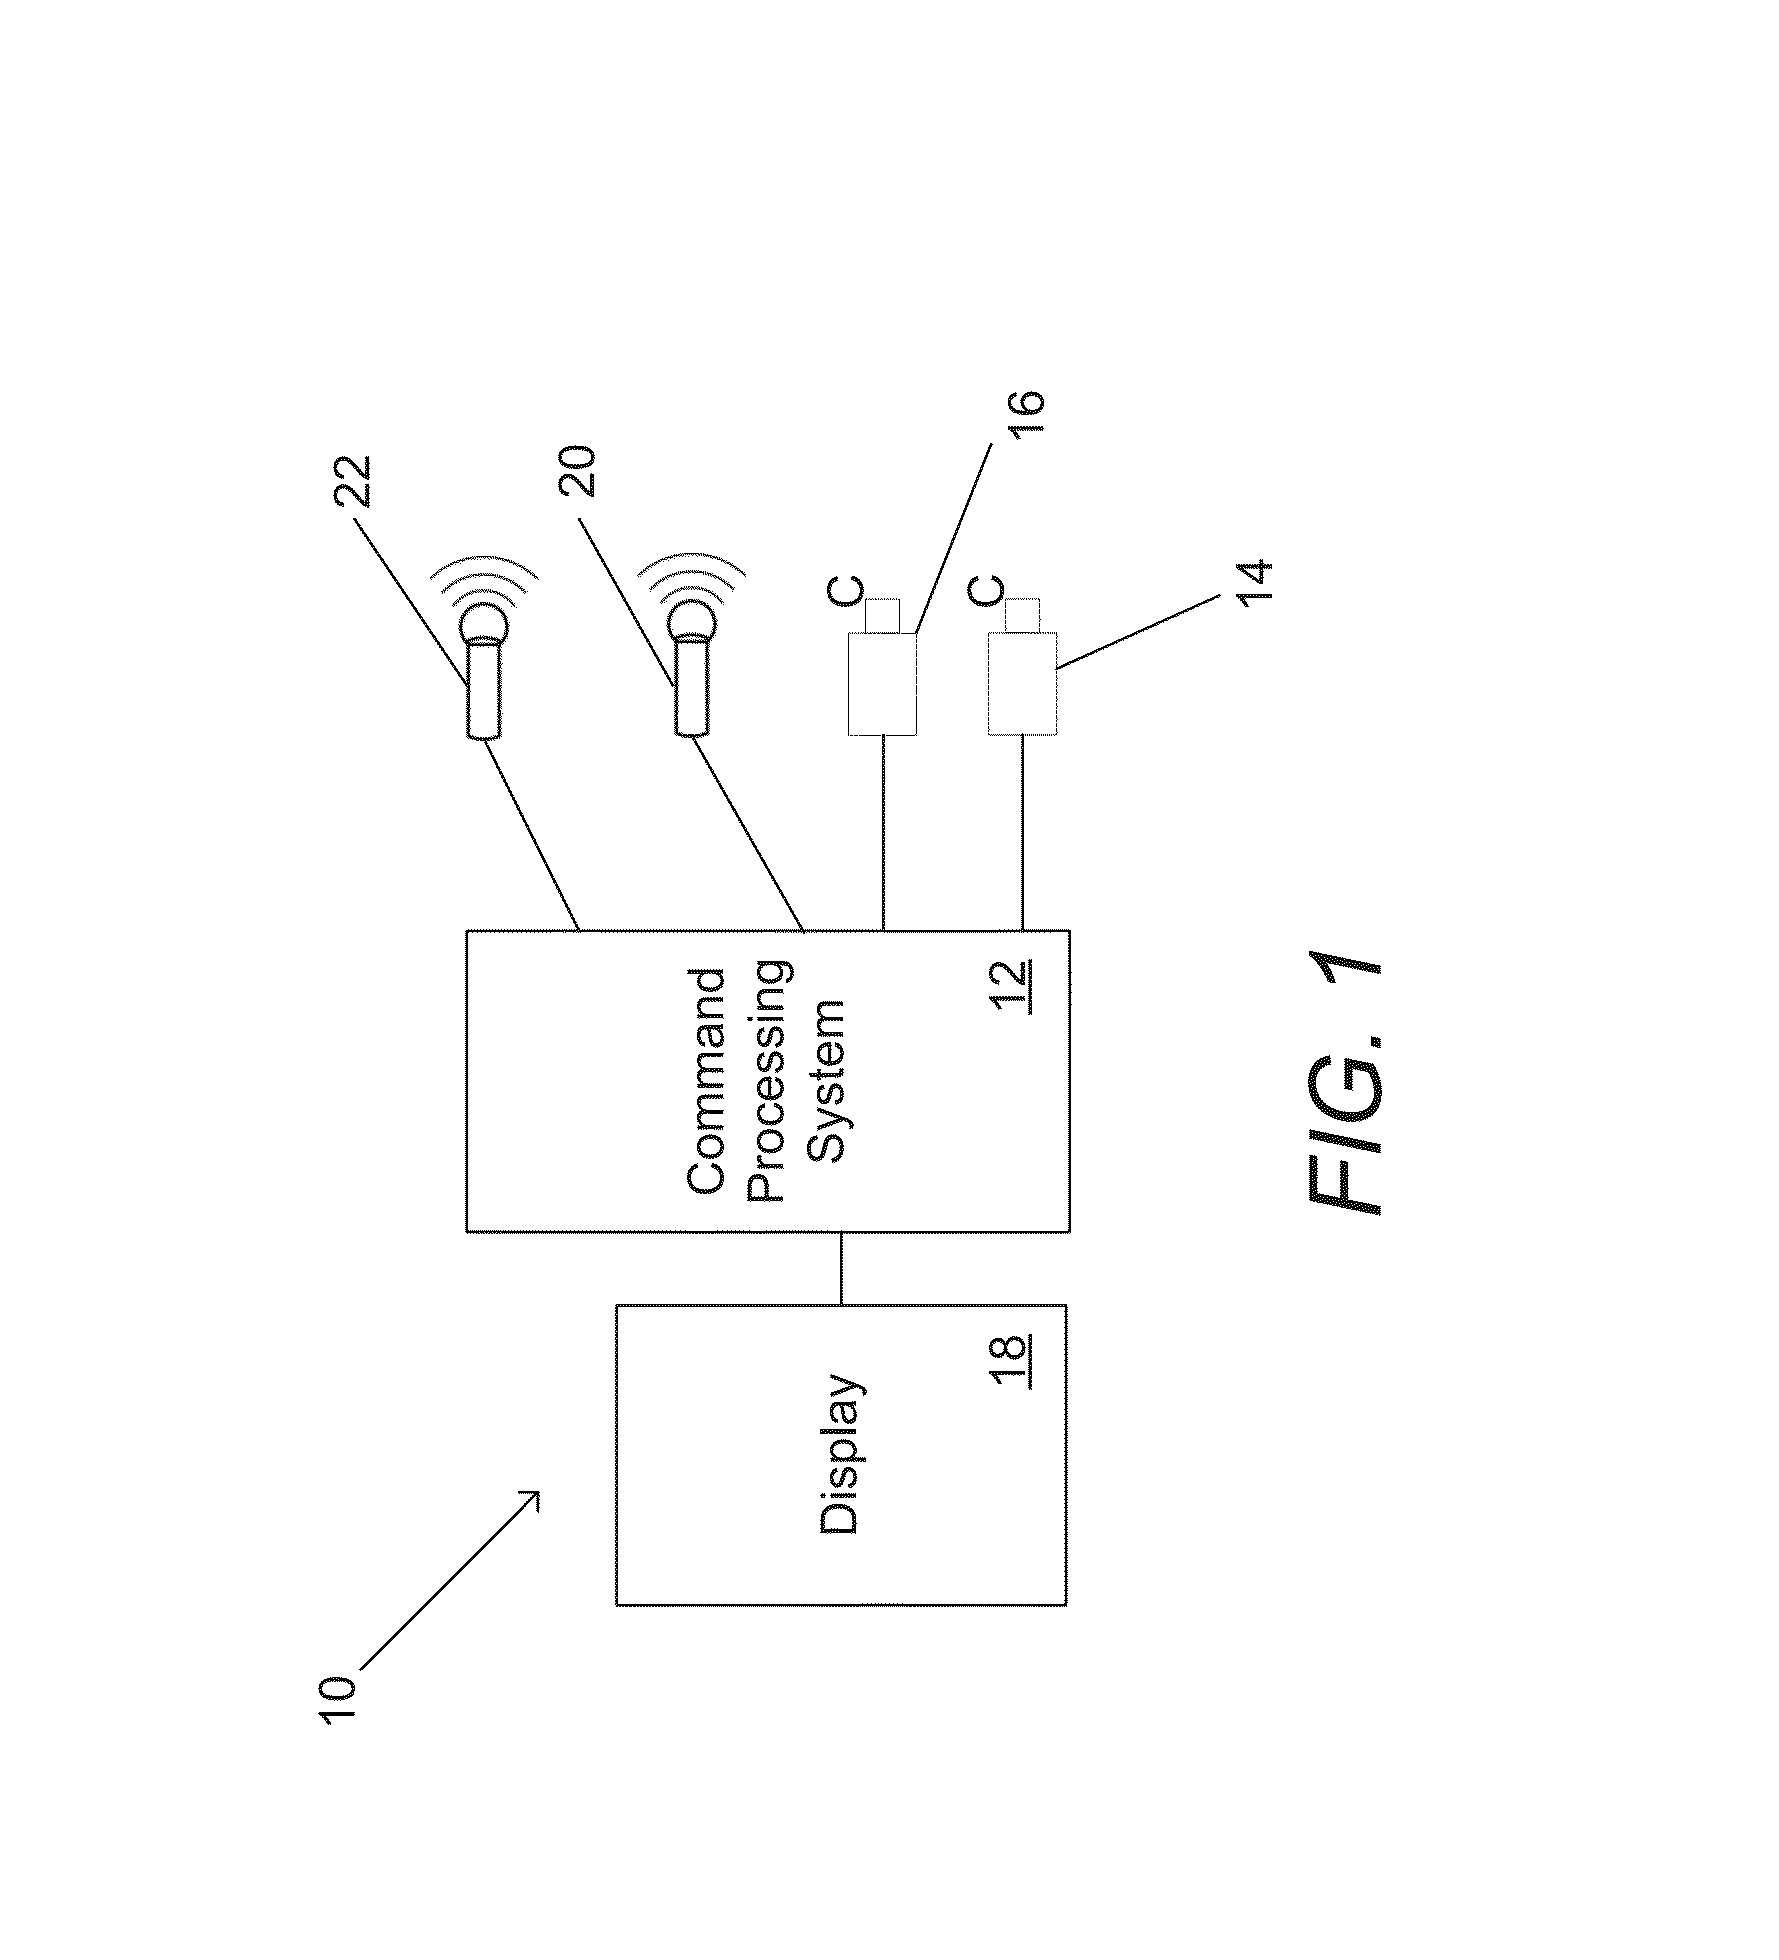 Systems and methods for natural interaction with operating systems and application graphical user interfaces using gestural and vocal input